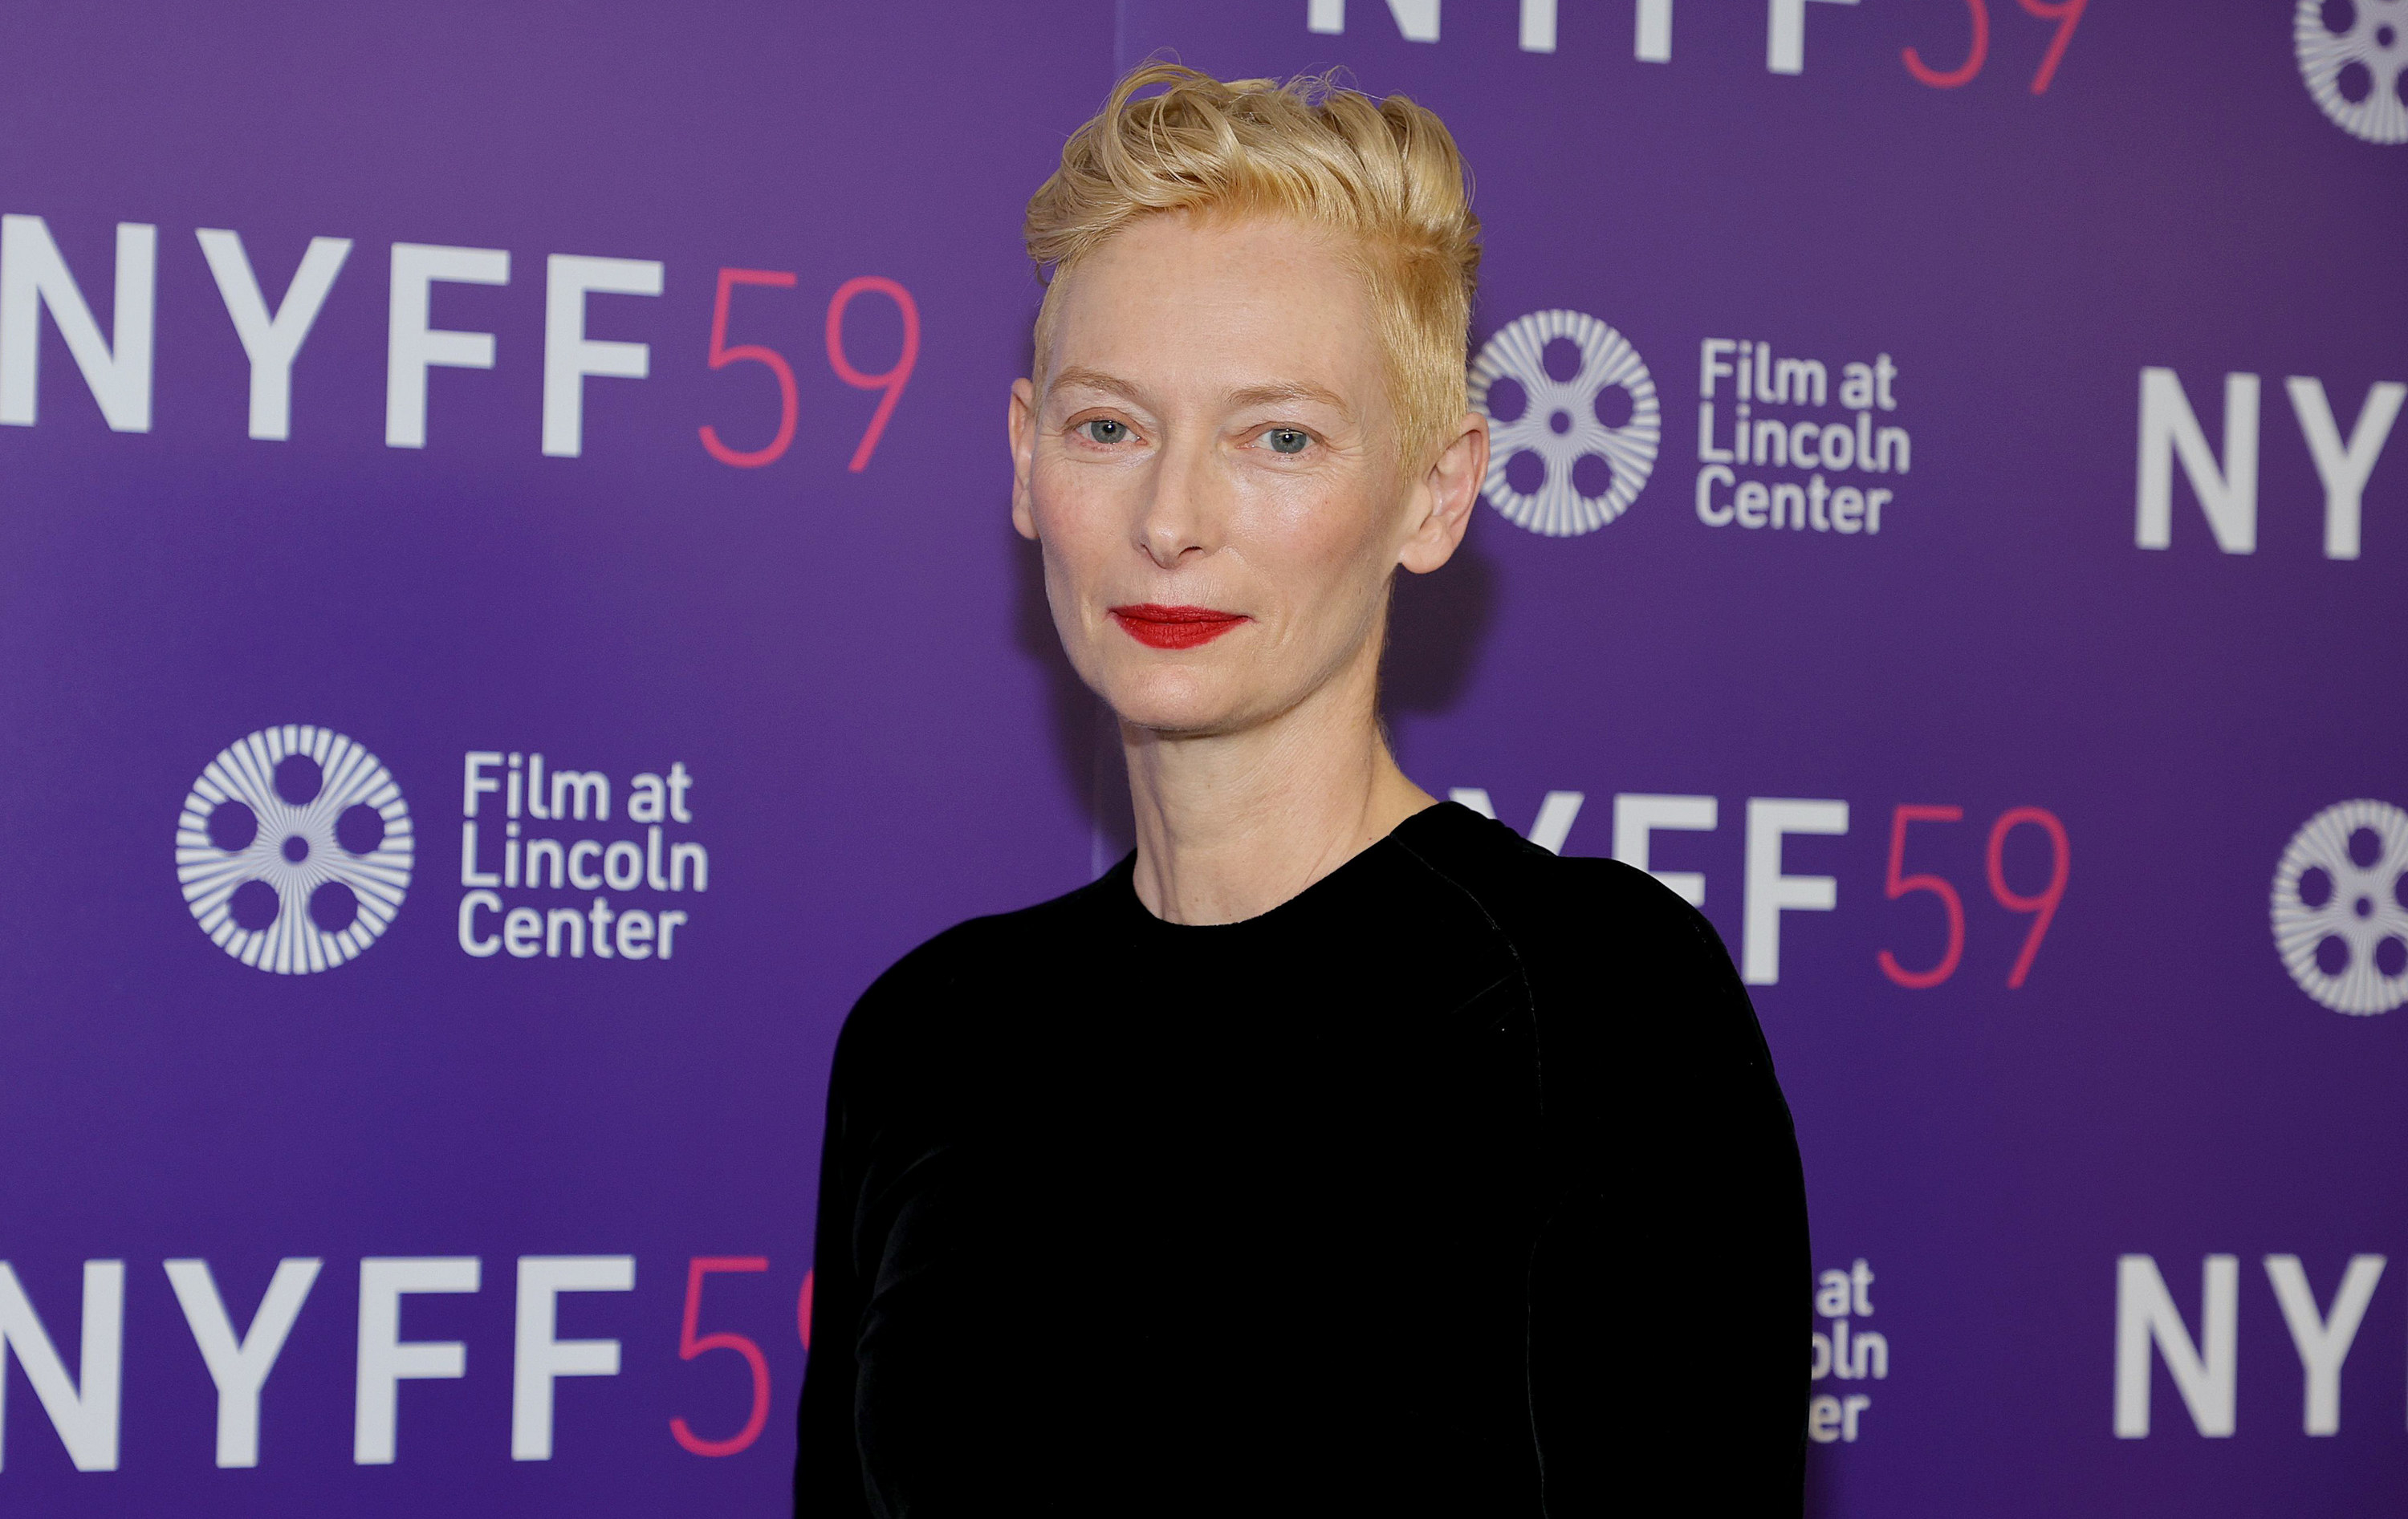 Tilda Swinton dressed in a black dress for an event